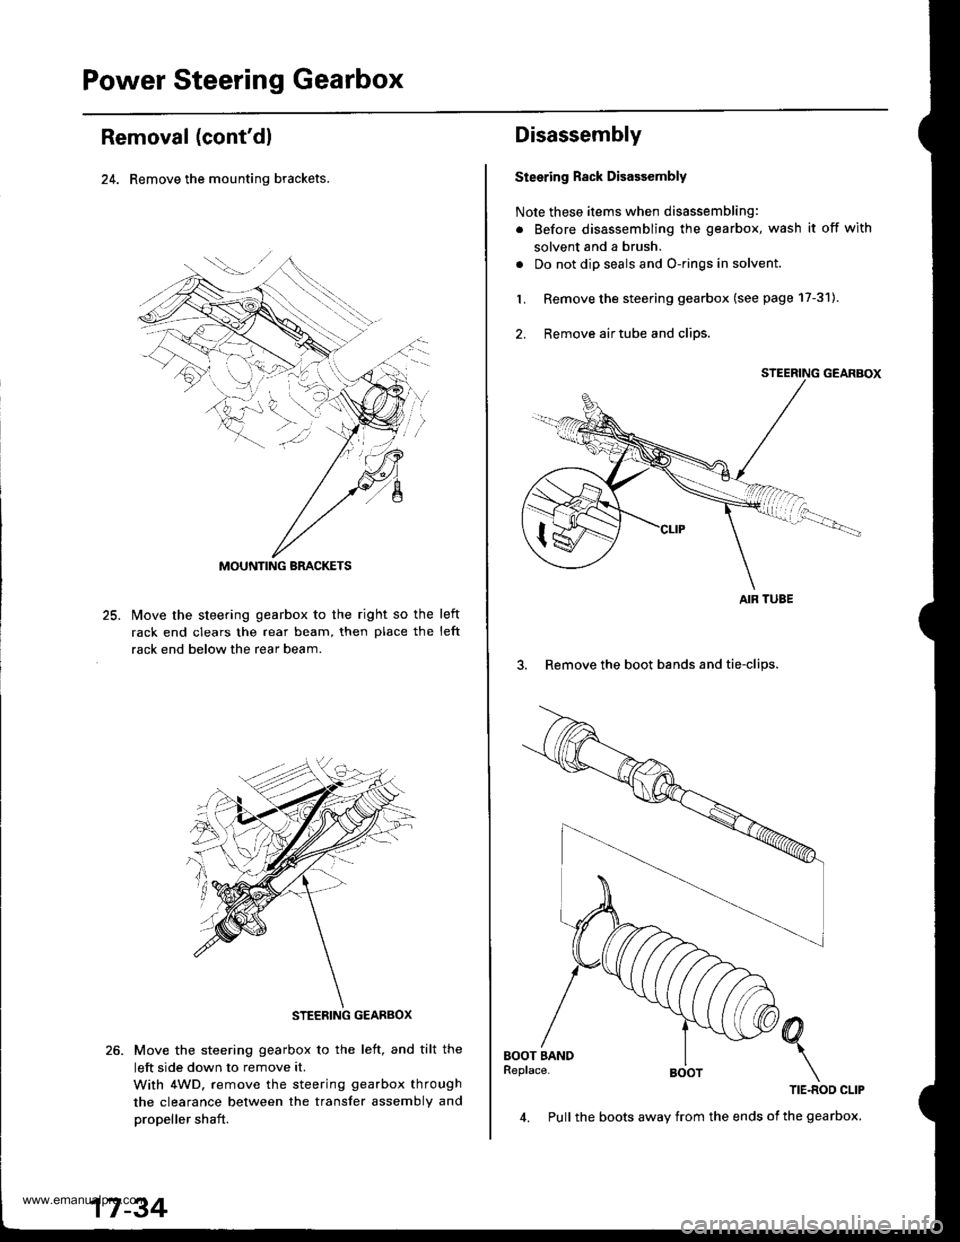 HONDA CR-V 1998 RD1-RD3 / 1.G Workshop Manual 
Power Steering Gearbox
Removal (contdl
24. Remove the mounting brackets.
25.lvlove the steering gearbox to the right so the
rack end clears the rear beam, then place the
rack end below the rear beam